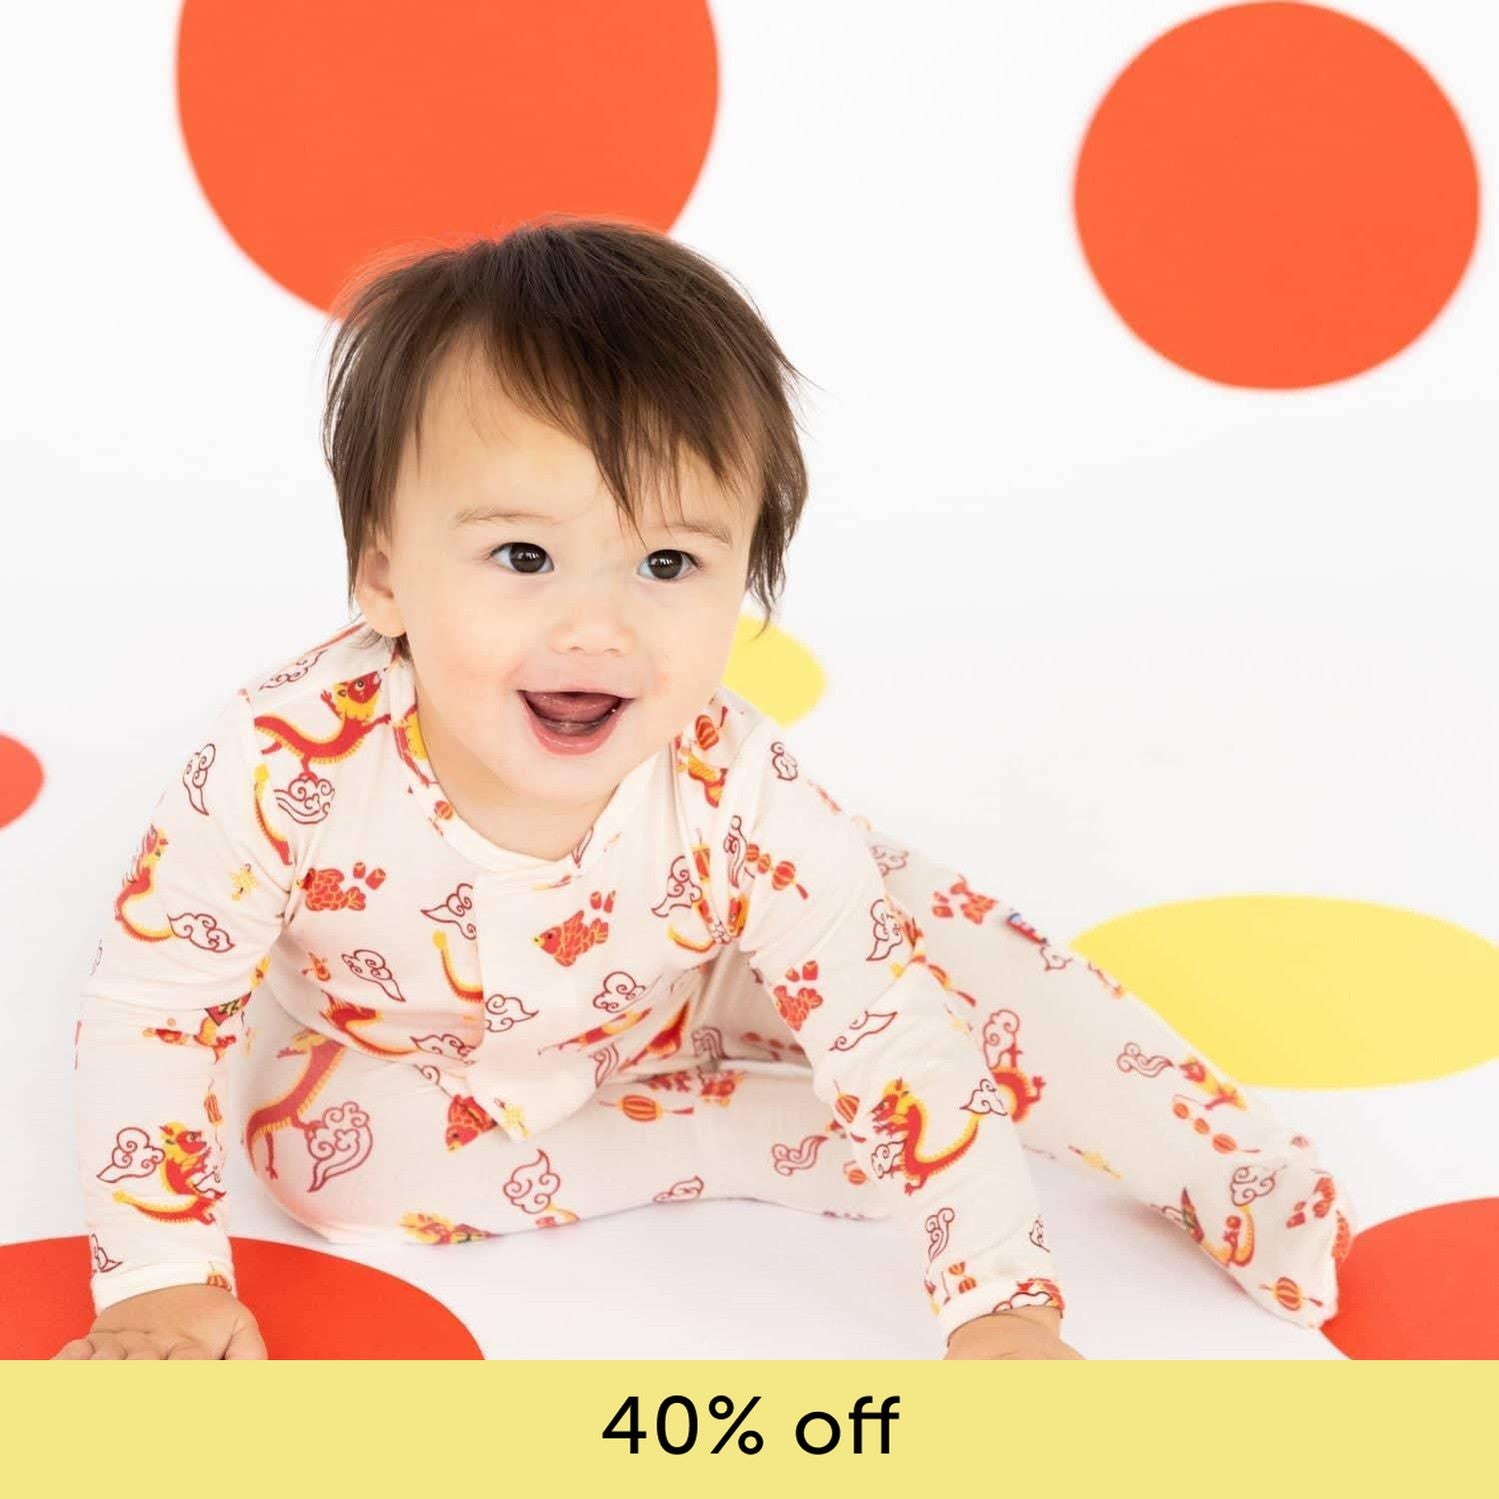 Is Cotton Modal the Best Fabric for Kids' Clothes?